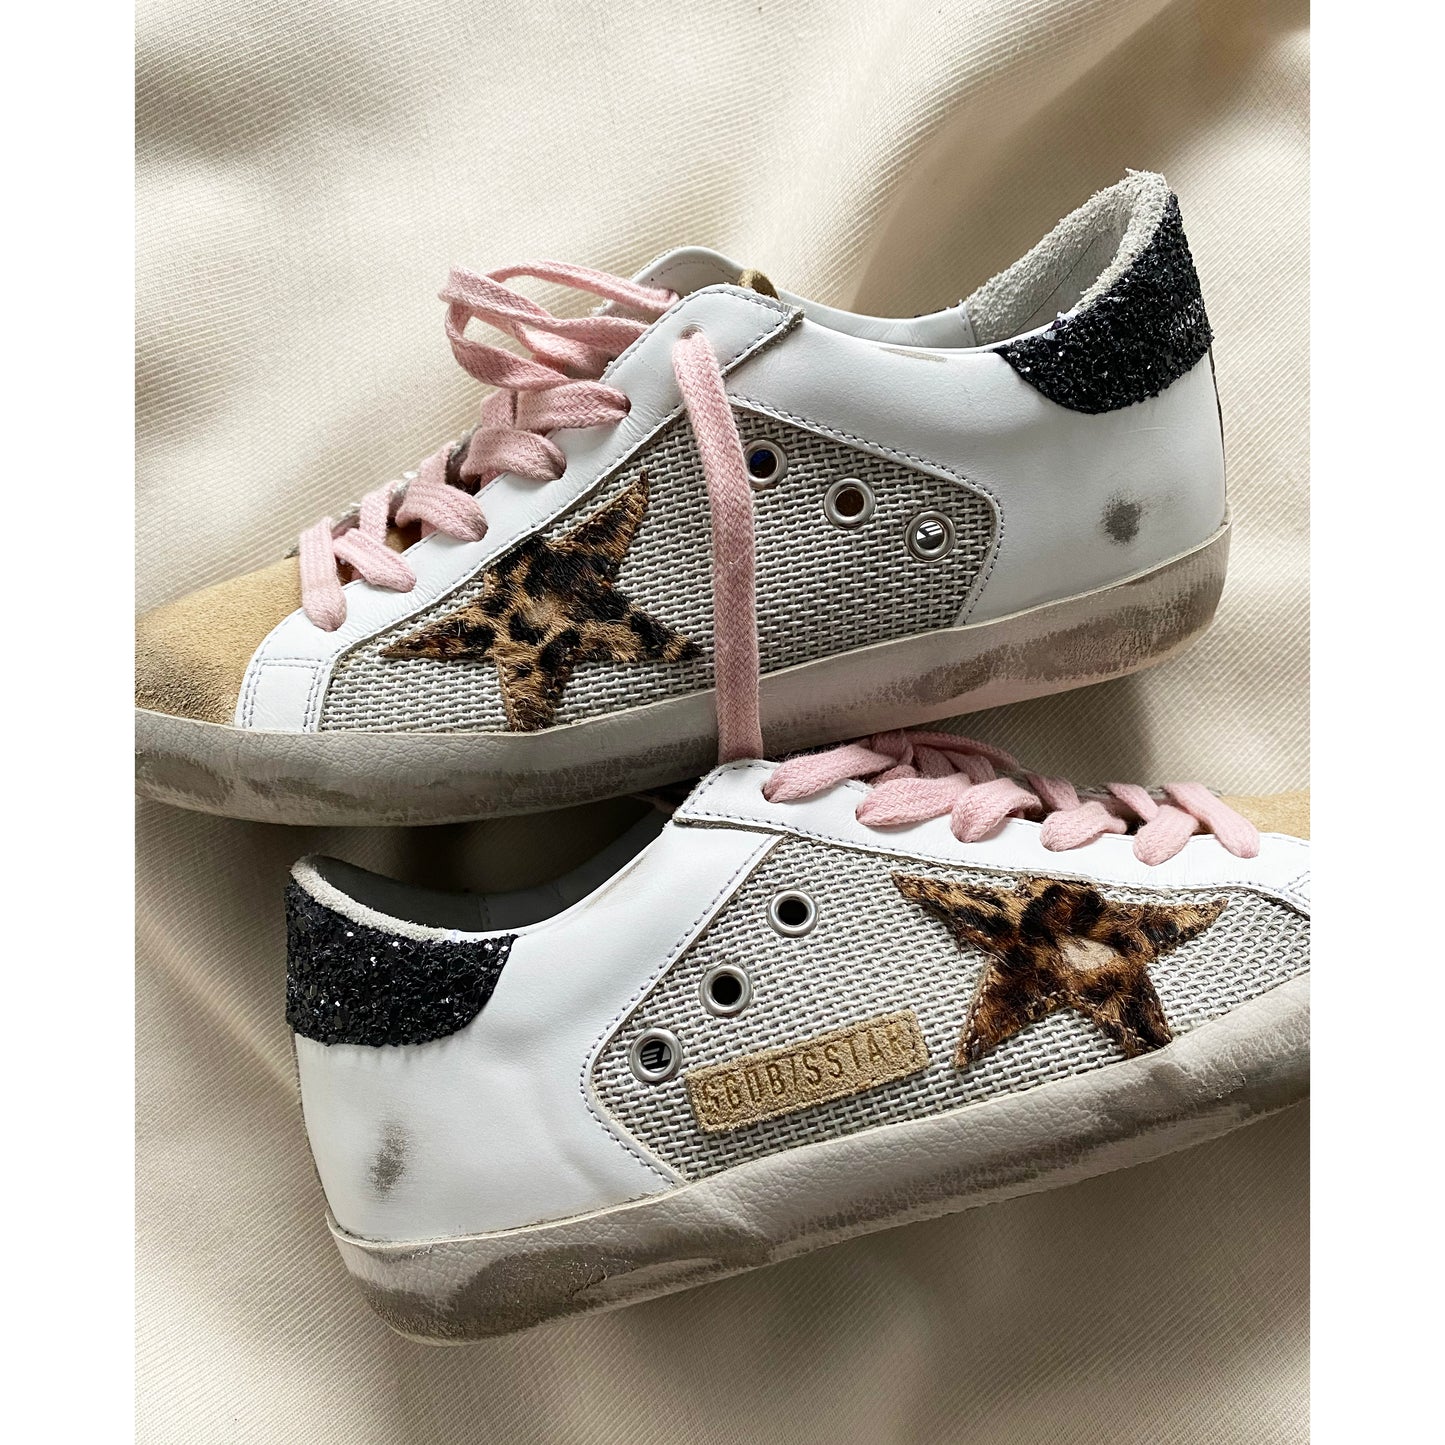 Golden Goose Superstar Sneakers Mesh with Leopard Star, size 36